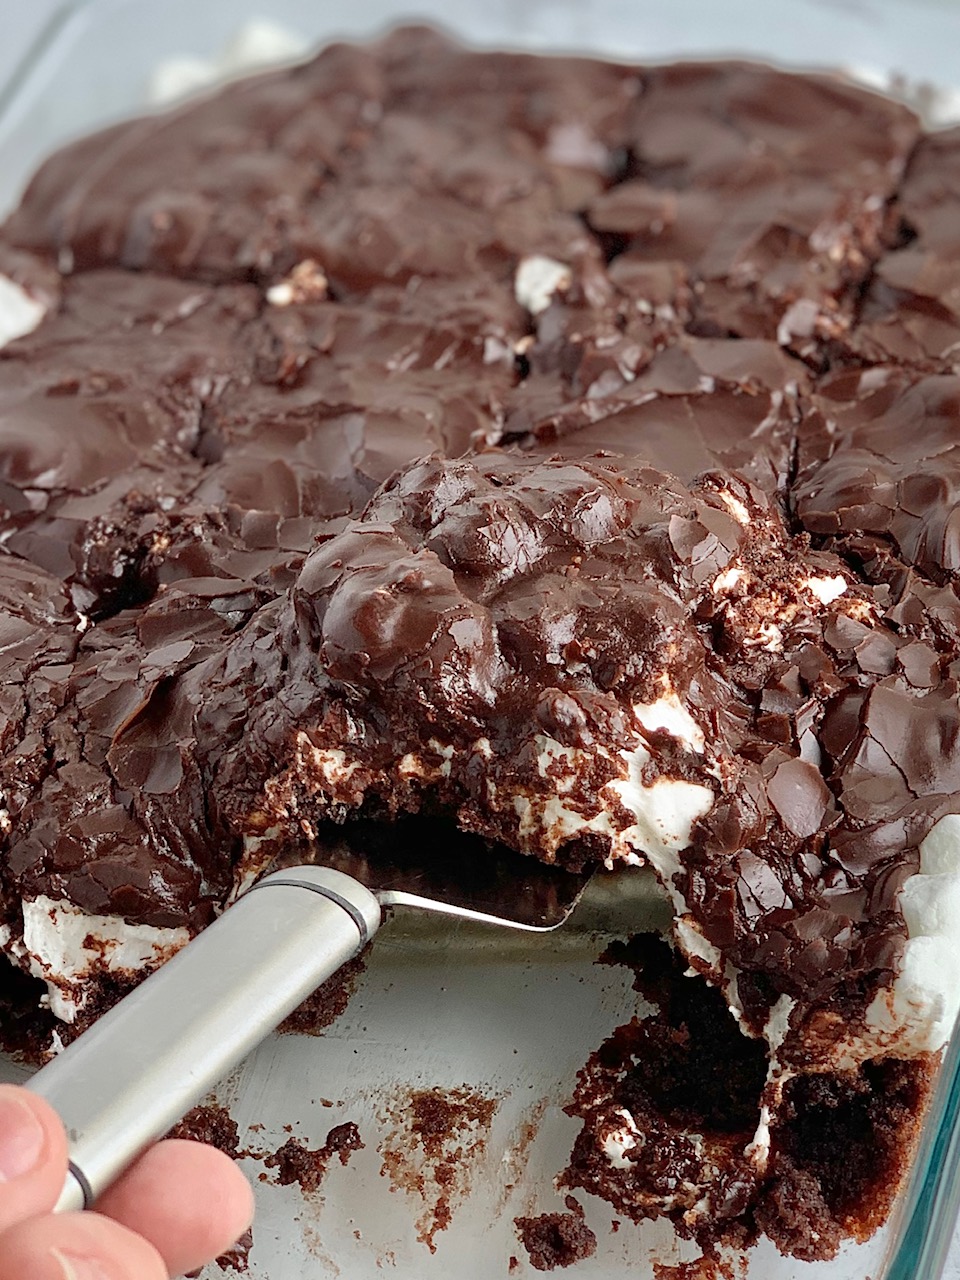 A glass baking dish filled with a dark brown chocolate cake followed by a white layer of mini marshmallows and topped with dark brown chocolate frosting. The bars have been cut into squares and some are missing from the pan.m,